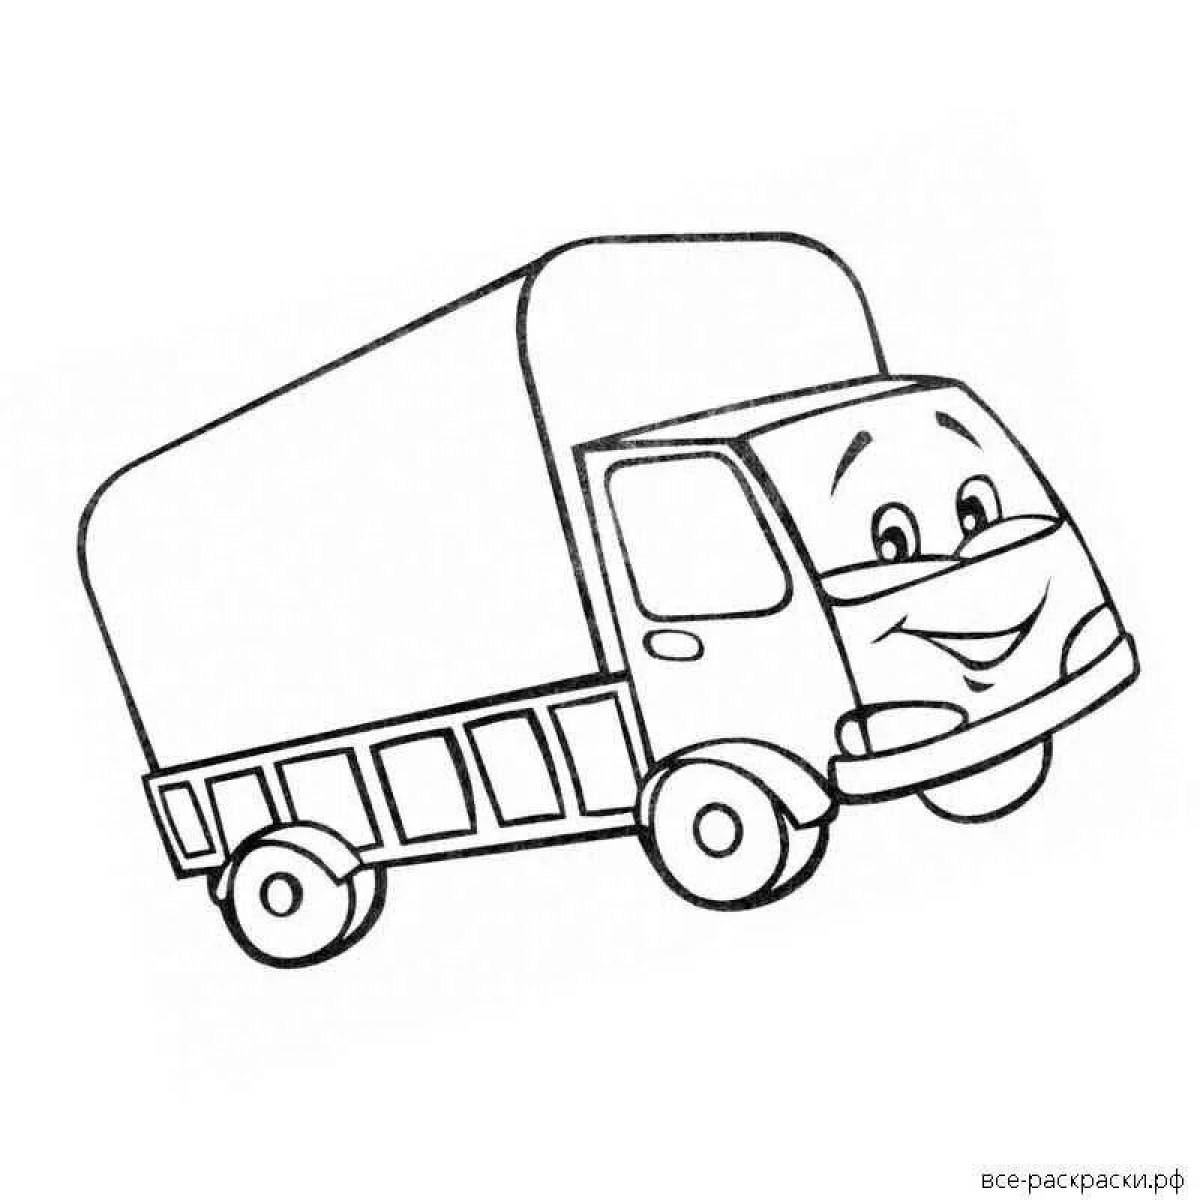 Shiny lion truck coloring book